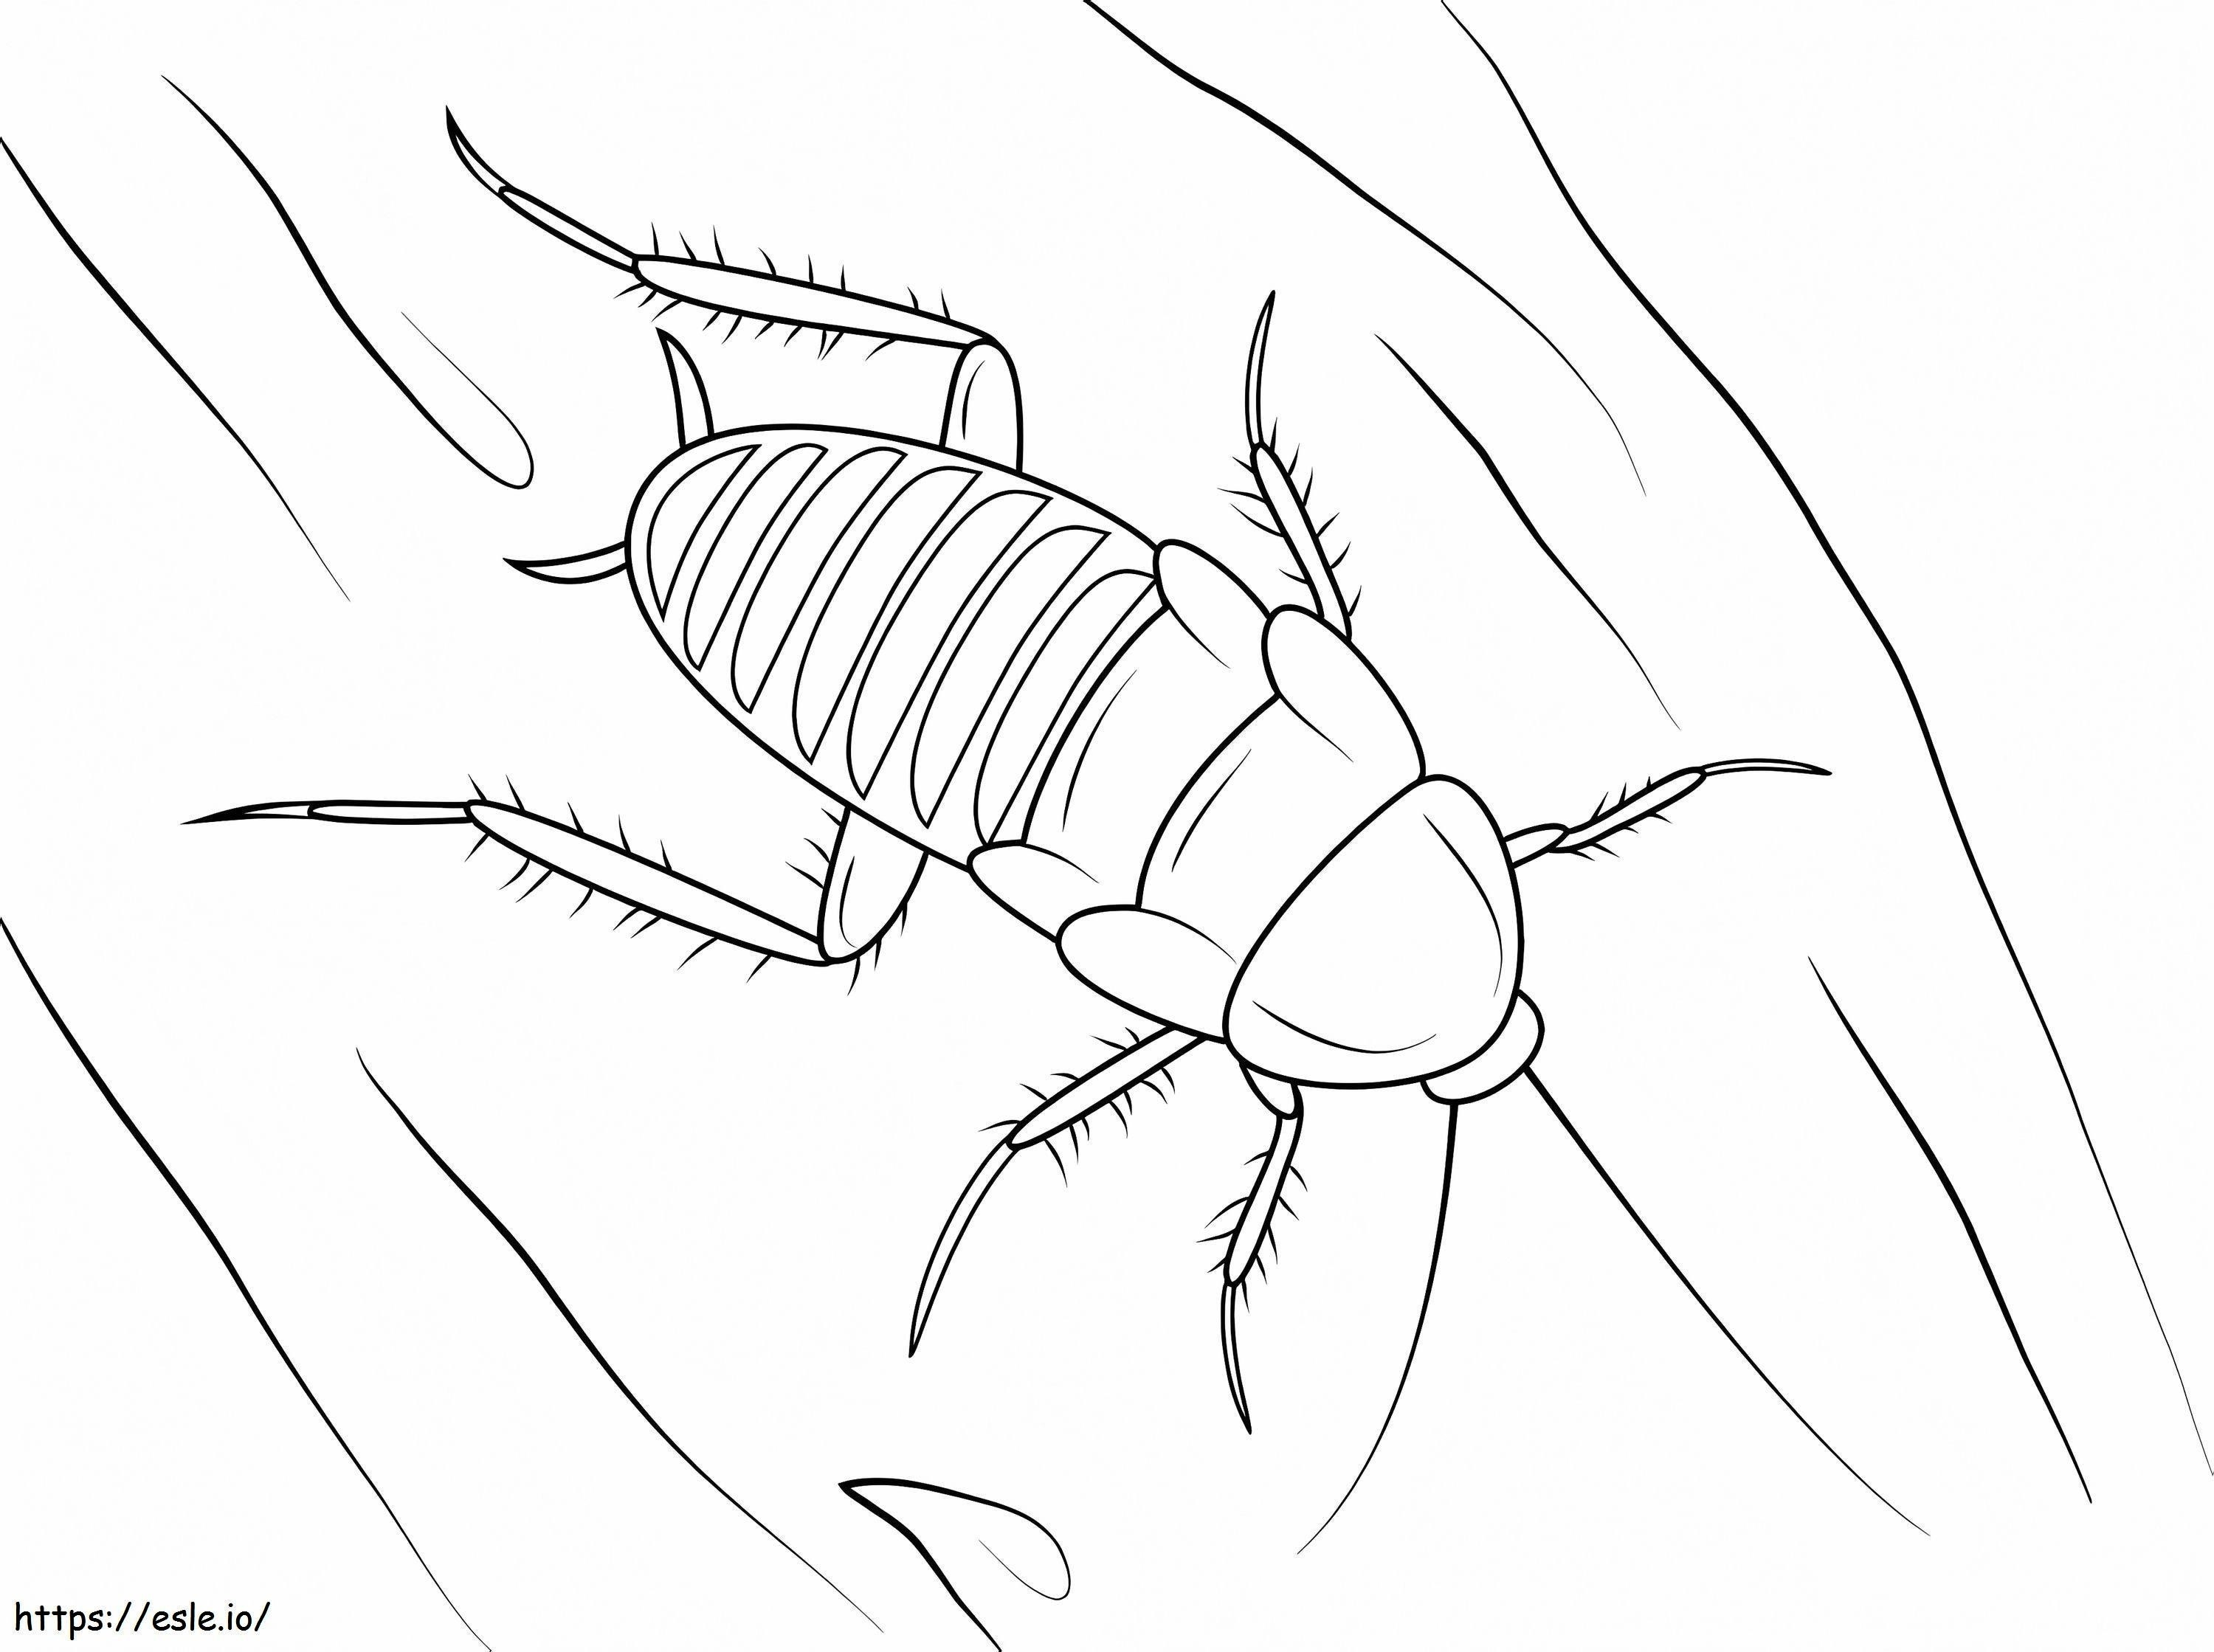 Zebra Cockroach coloring page